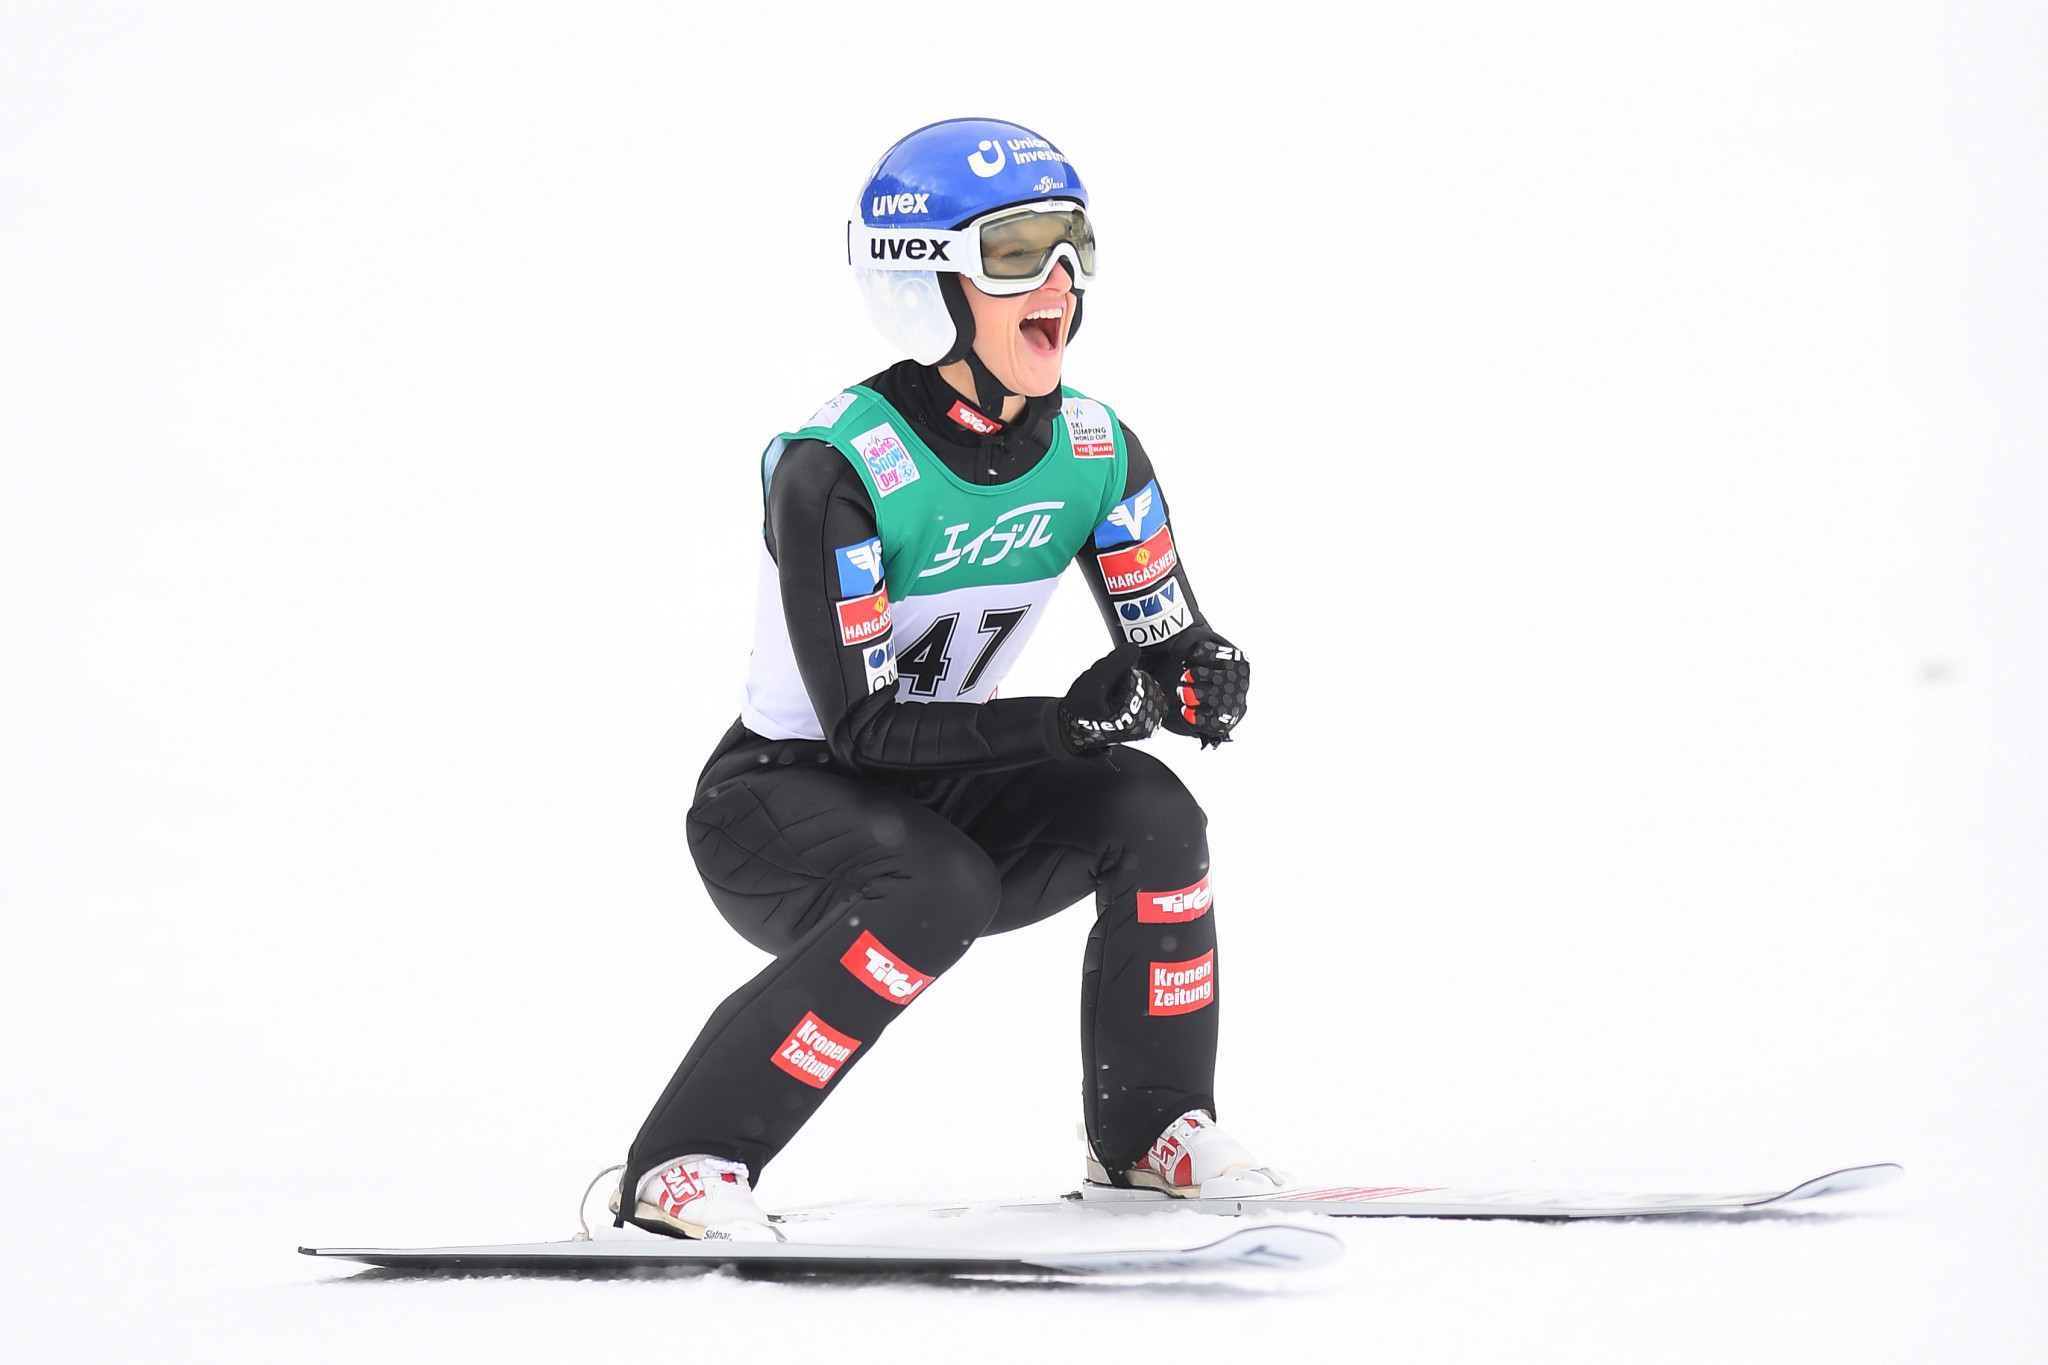 Pinkelnig captures maiden Ski Jumping World Cup title in Sapporo as Lundby breaks hill record